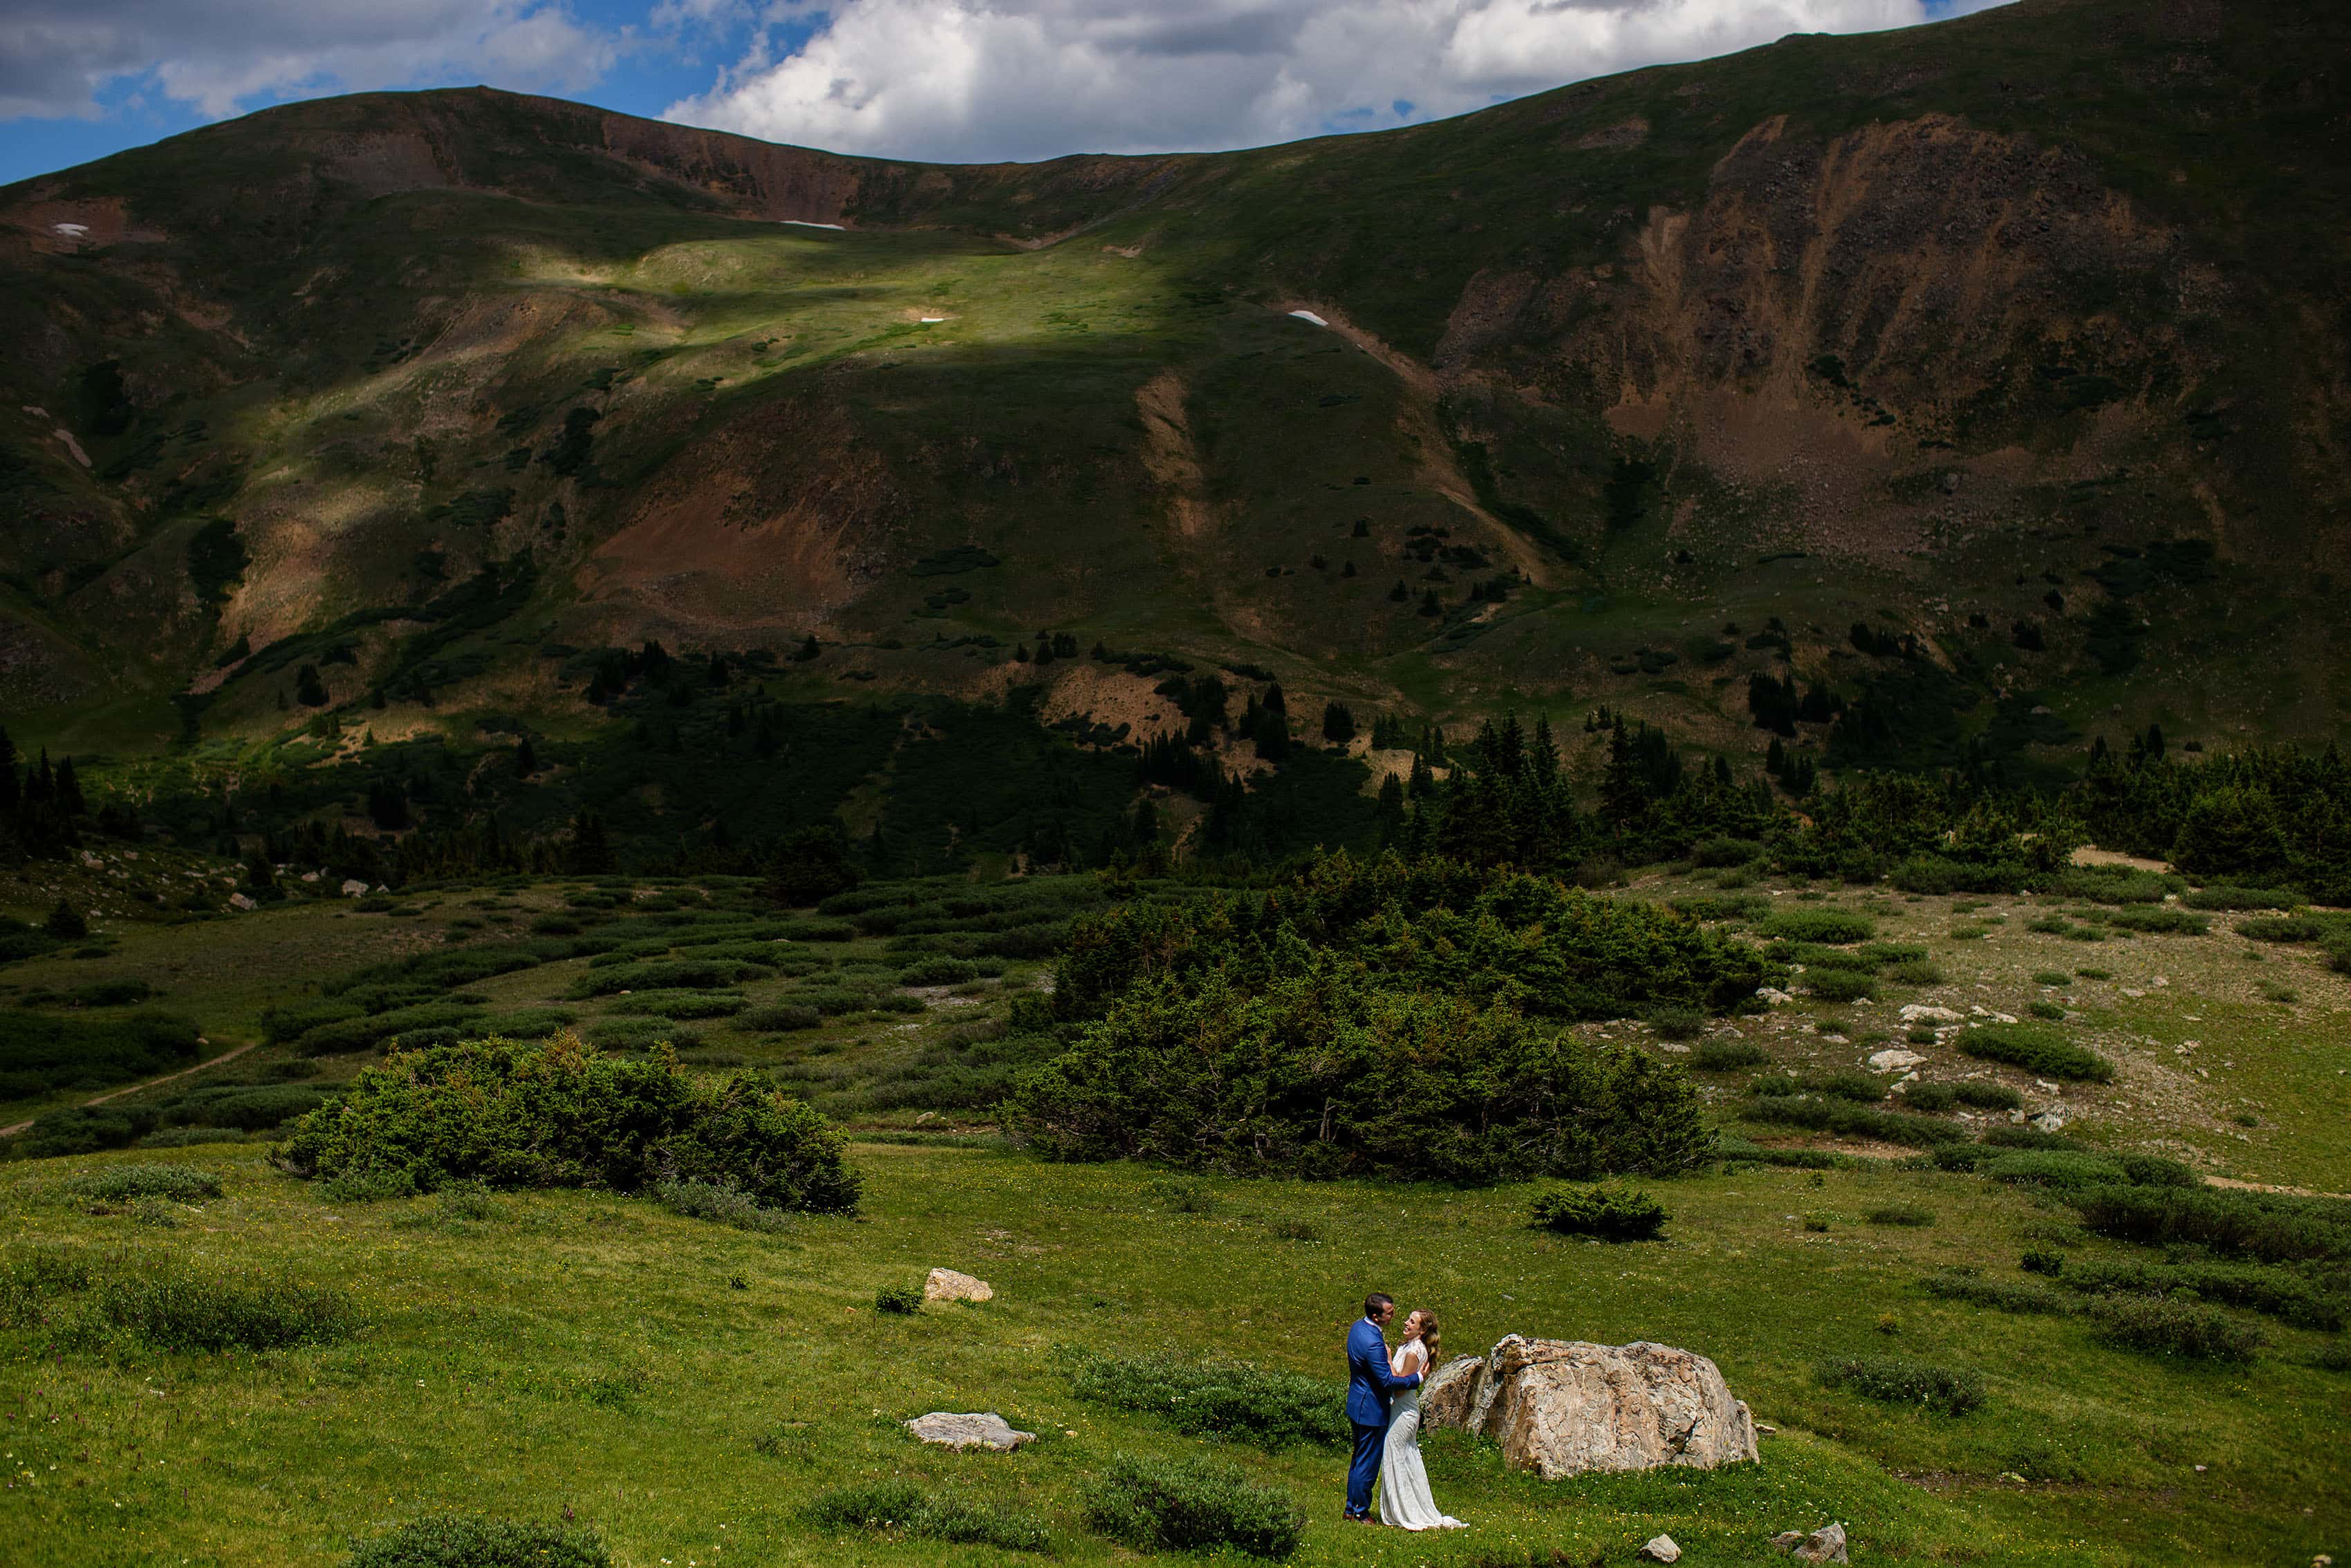 The couple embraces on Loveland Pass